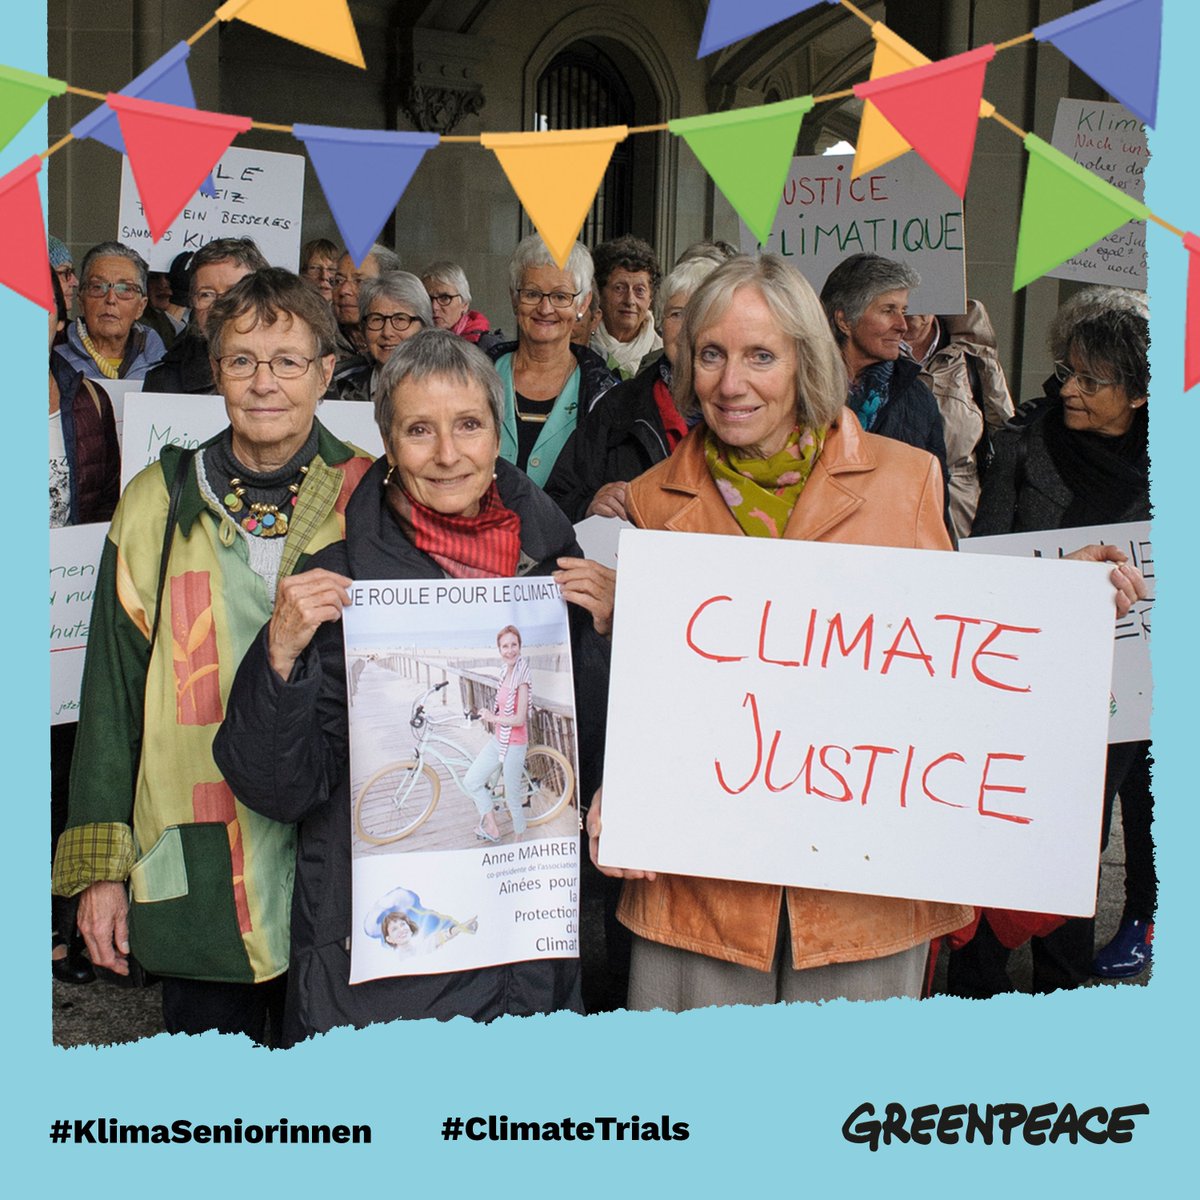 As the landmark judgement in the @KlimaSeniorin case sets a global precedent for #ClimateJustice, the UN Special Rapporteur urges the Council of Europe to recognize the right to a healthy environment.